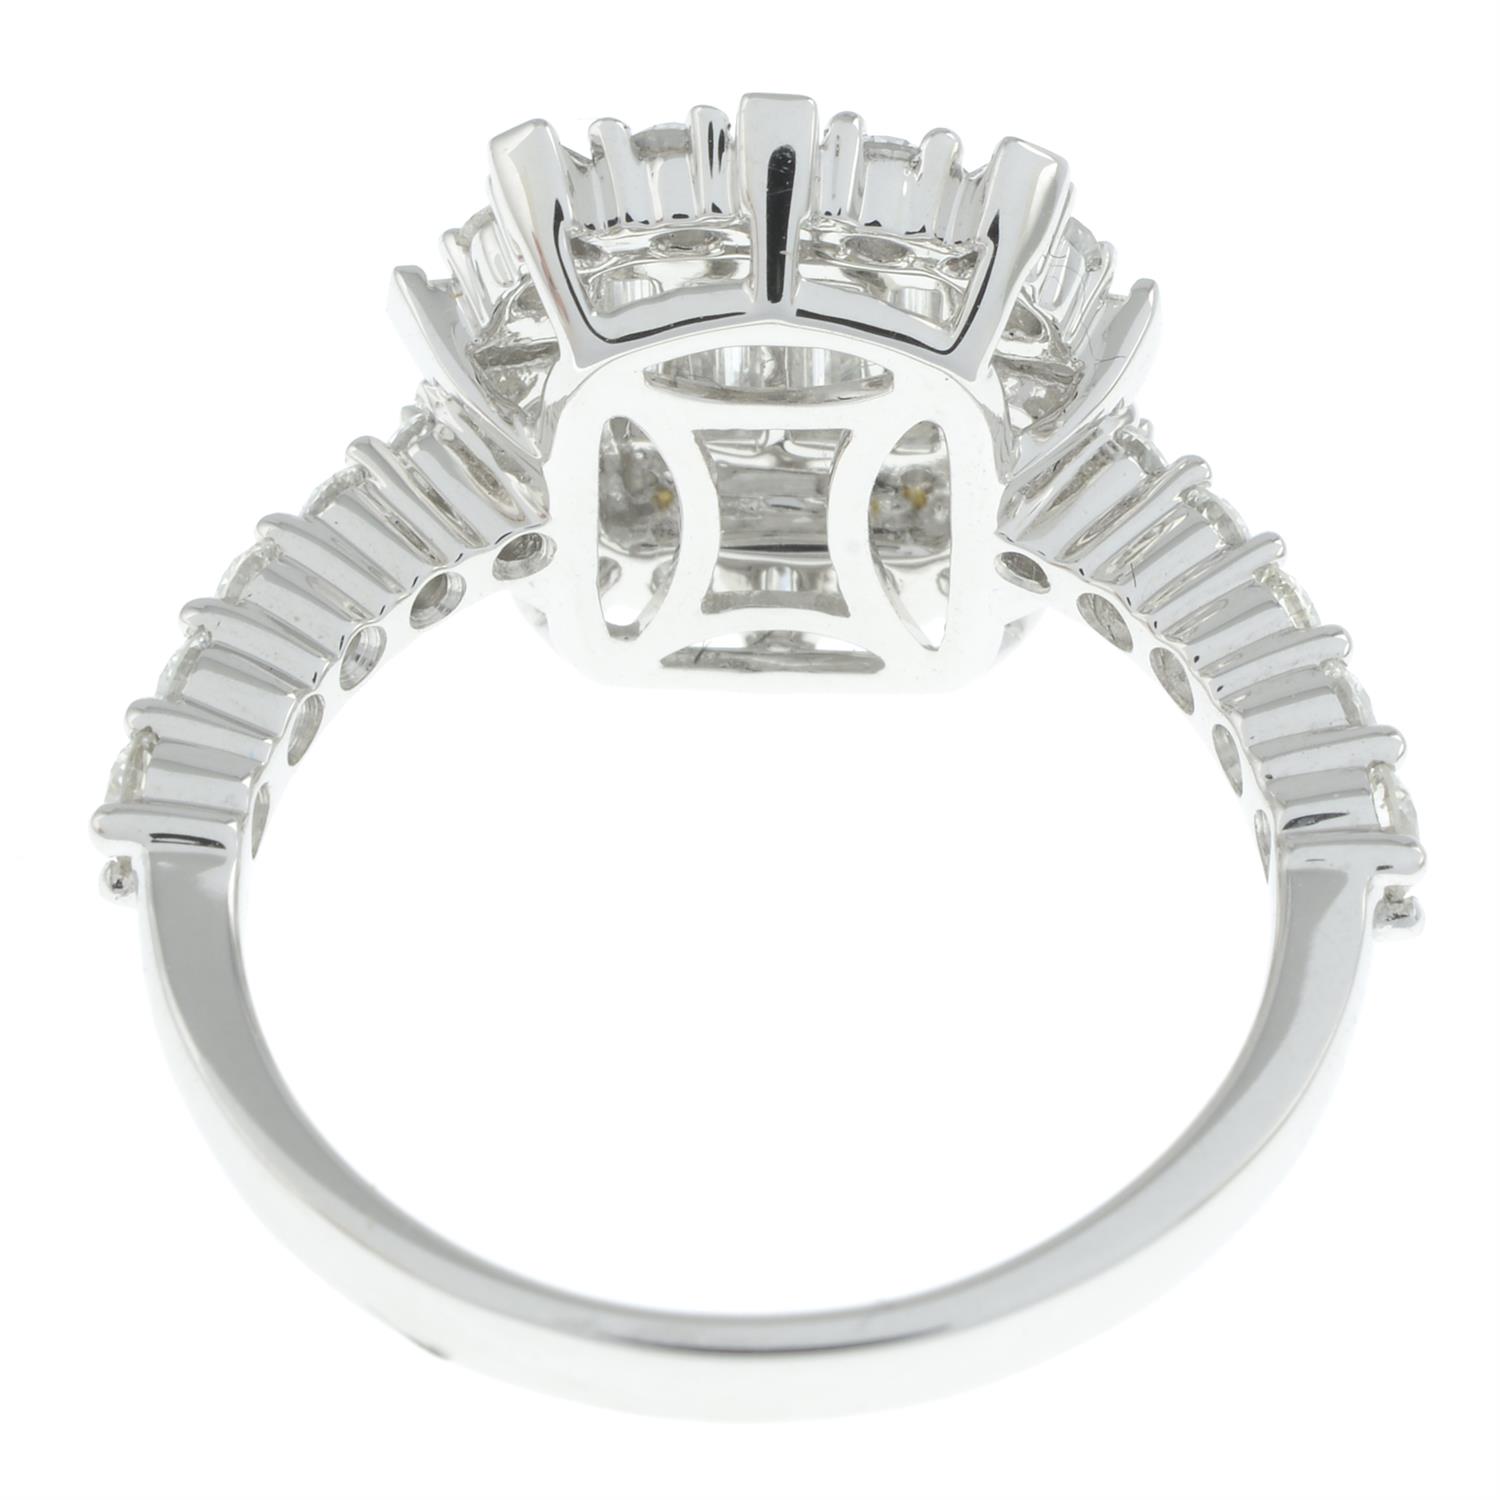 Diamond cluster ring - Image 3 of 6